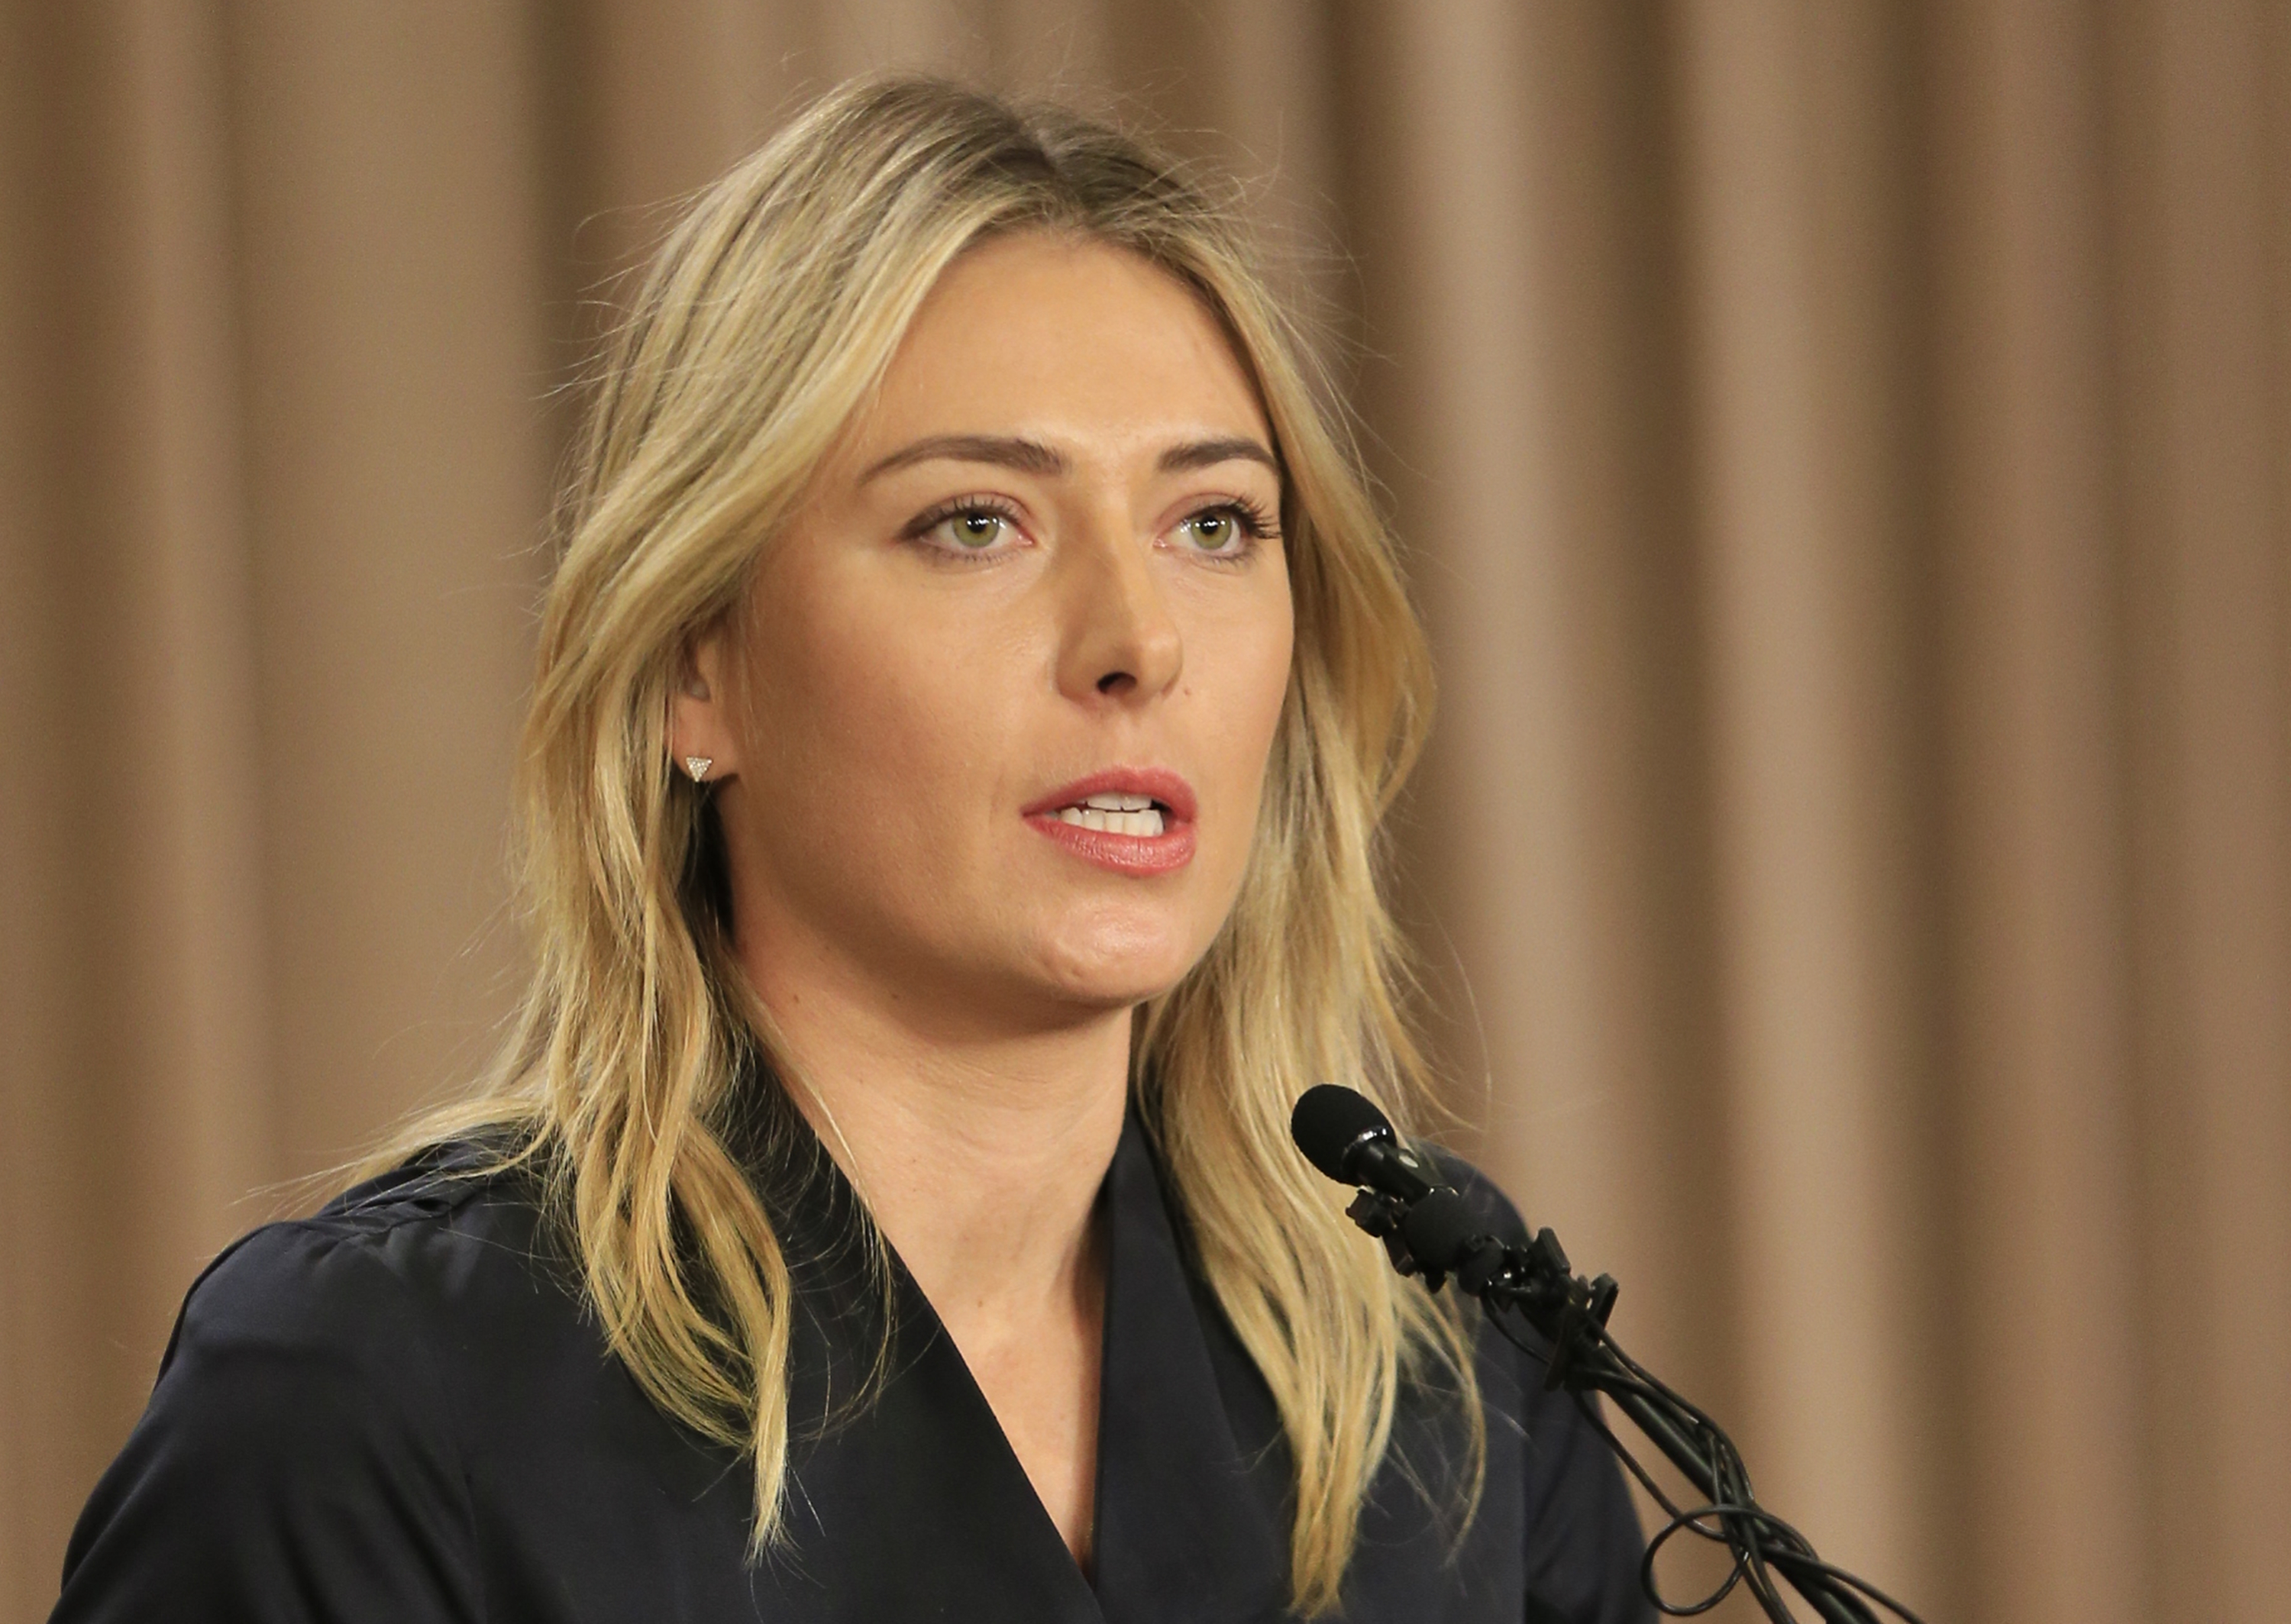 Tennis star Maria Sharapova speaks during a news conference in Los Angeles on Monday, March 7, 2016. Sharapova says she has failed a drug test at the Australian Open.